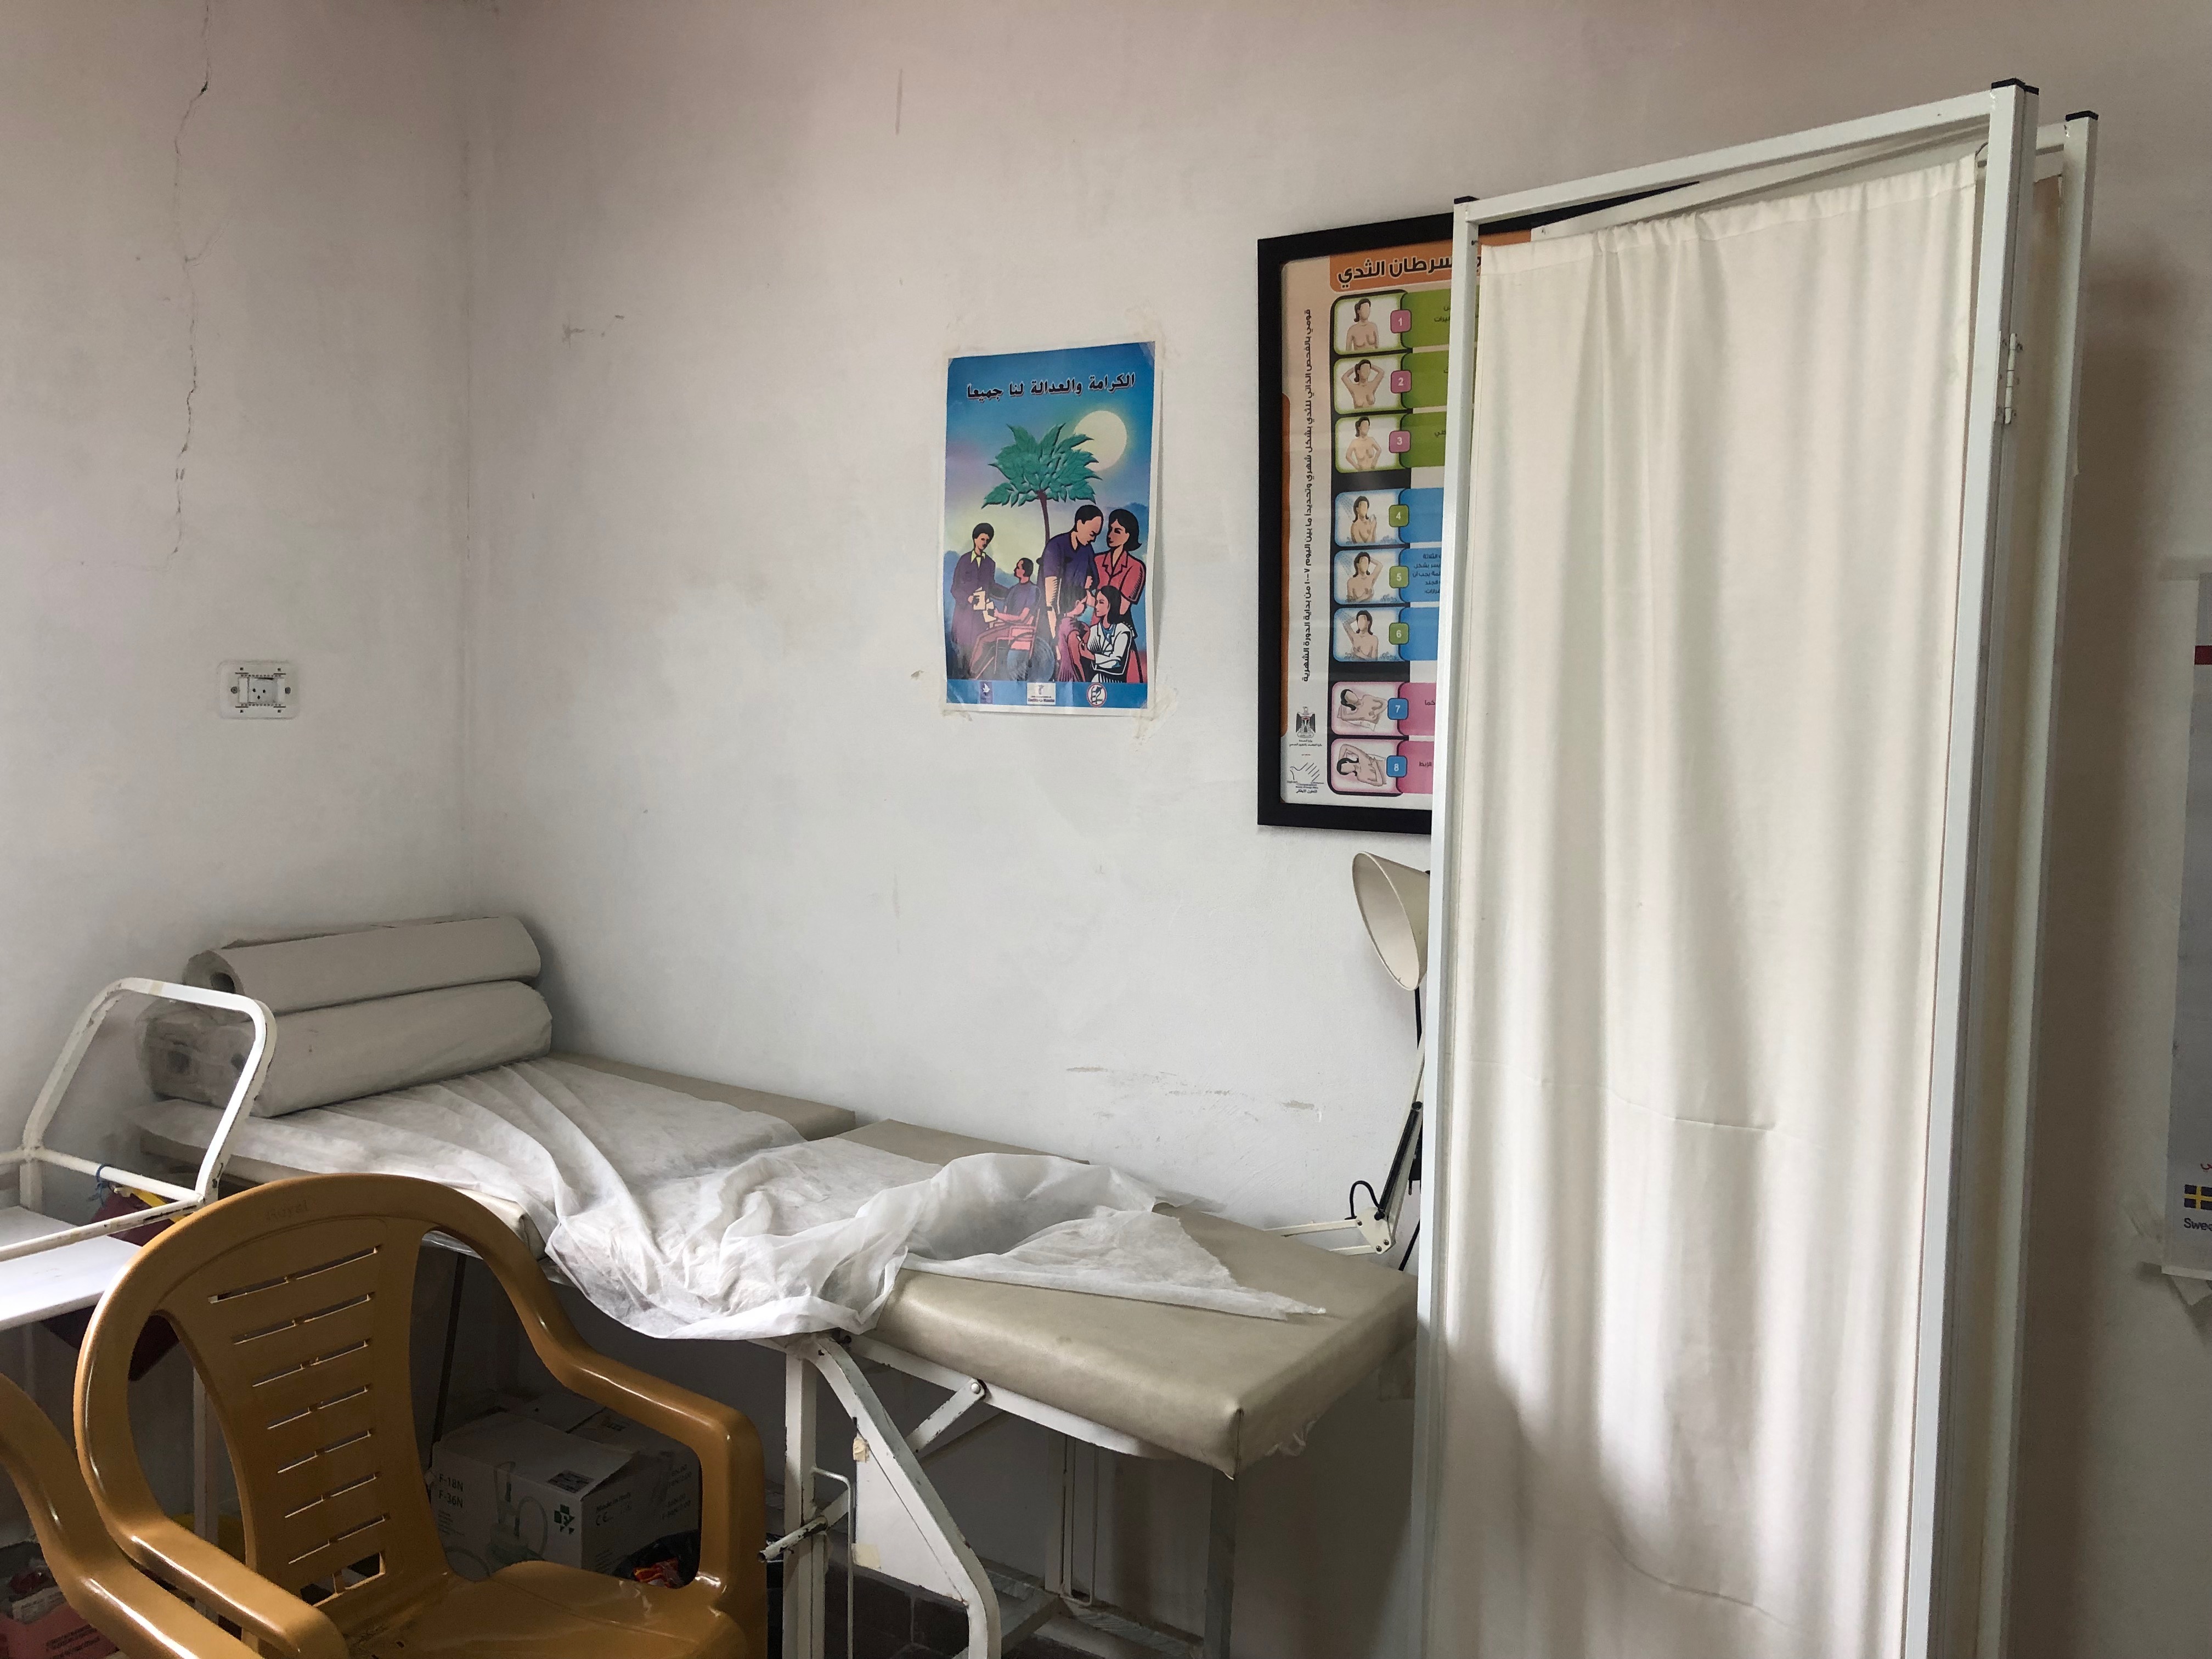 A room that used to serve as a patient consultation space for a mobile clinic providing primary healthcare services. Credit:WHO